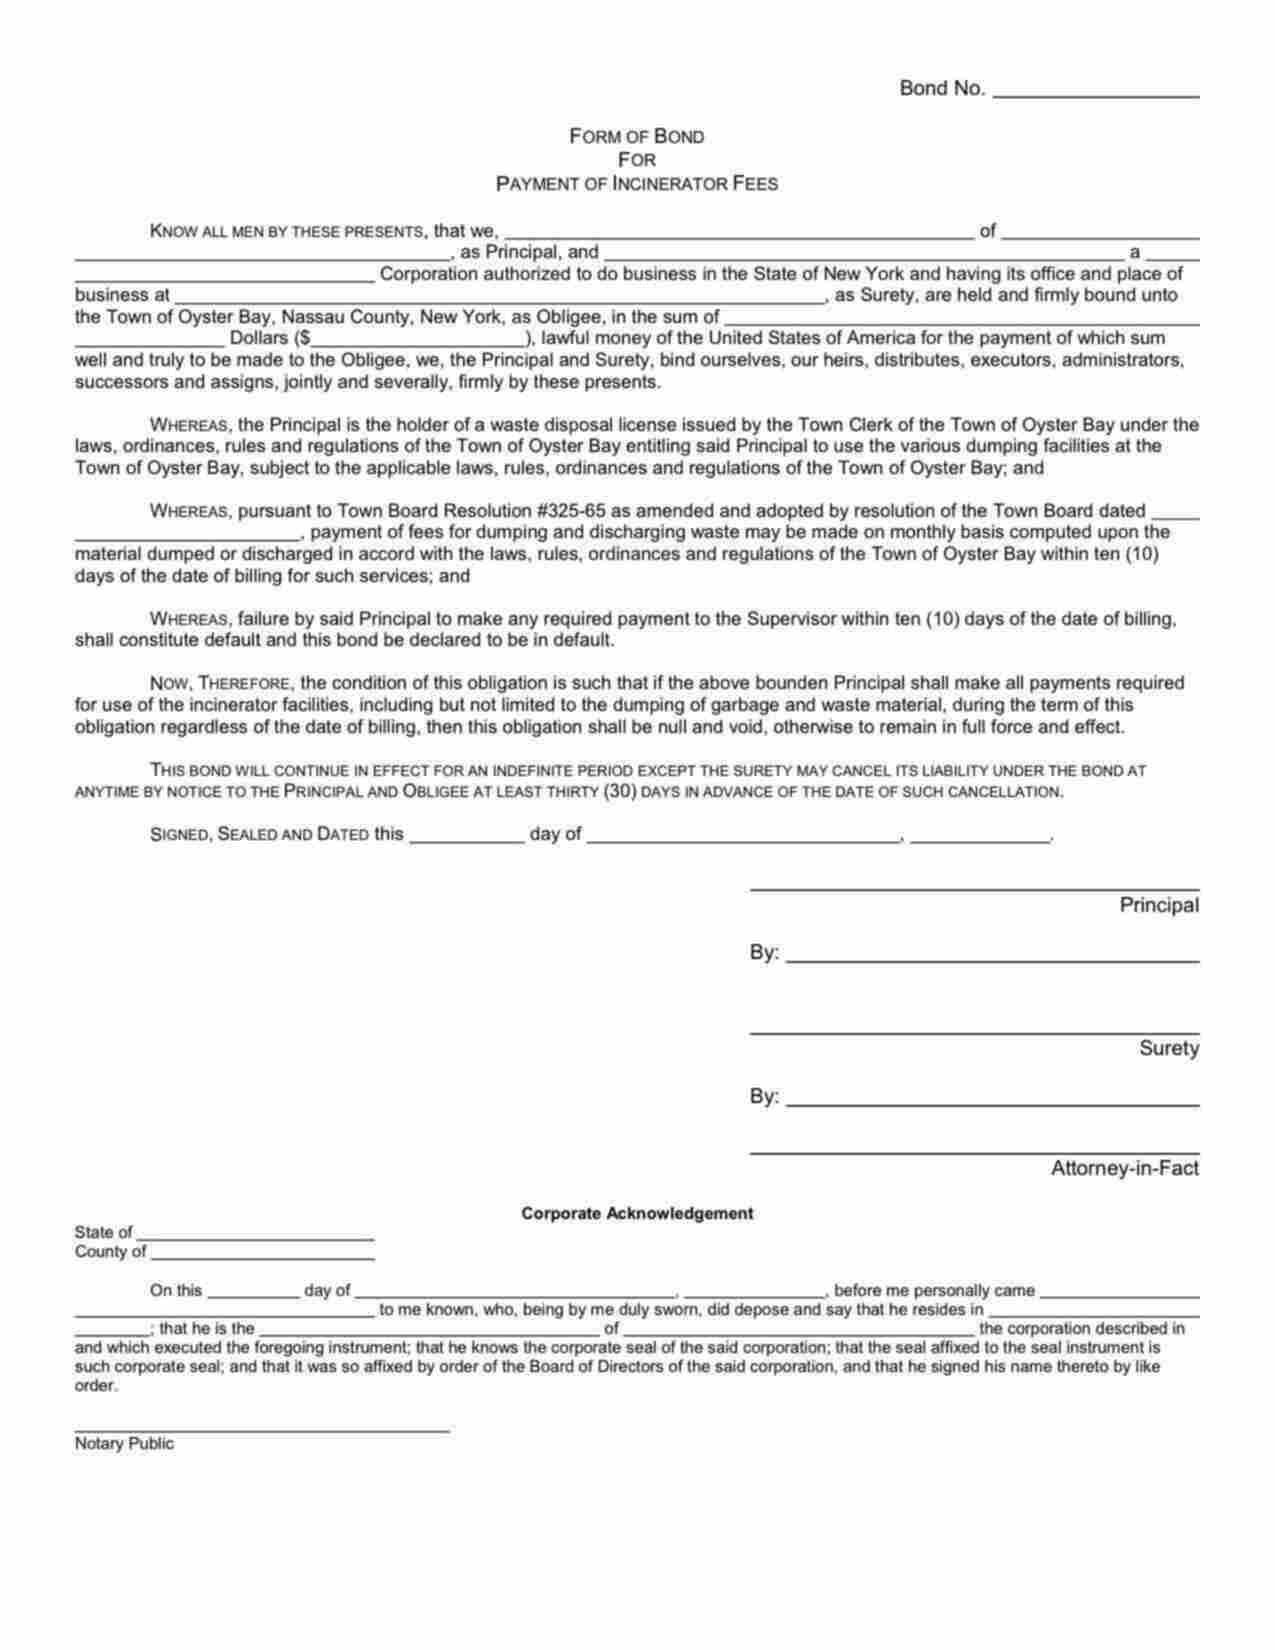 New York Payment of Incinerator Fees Bond Form